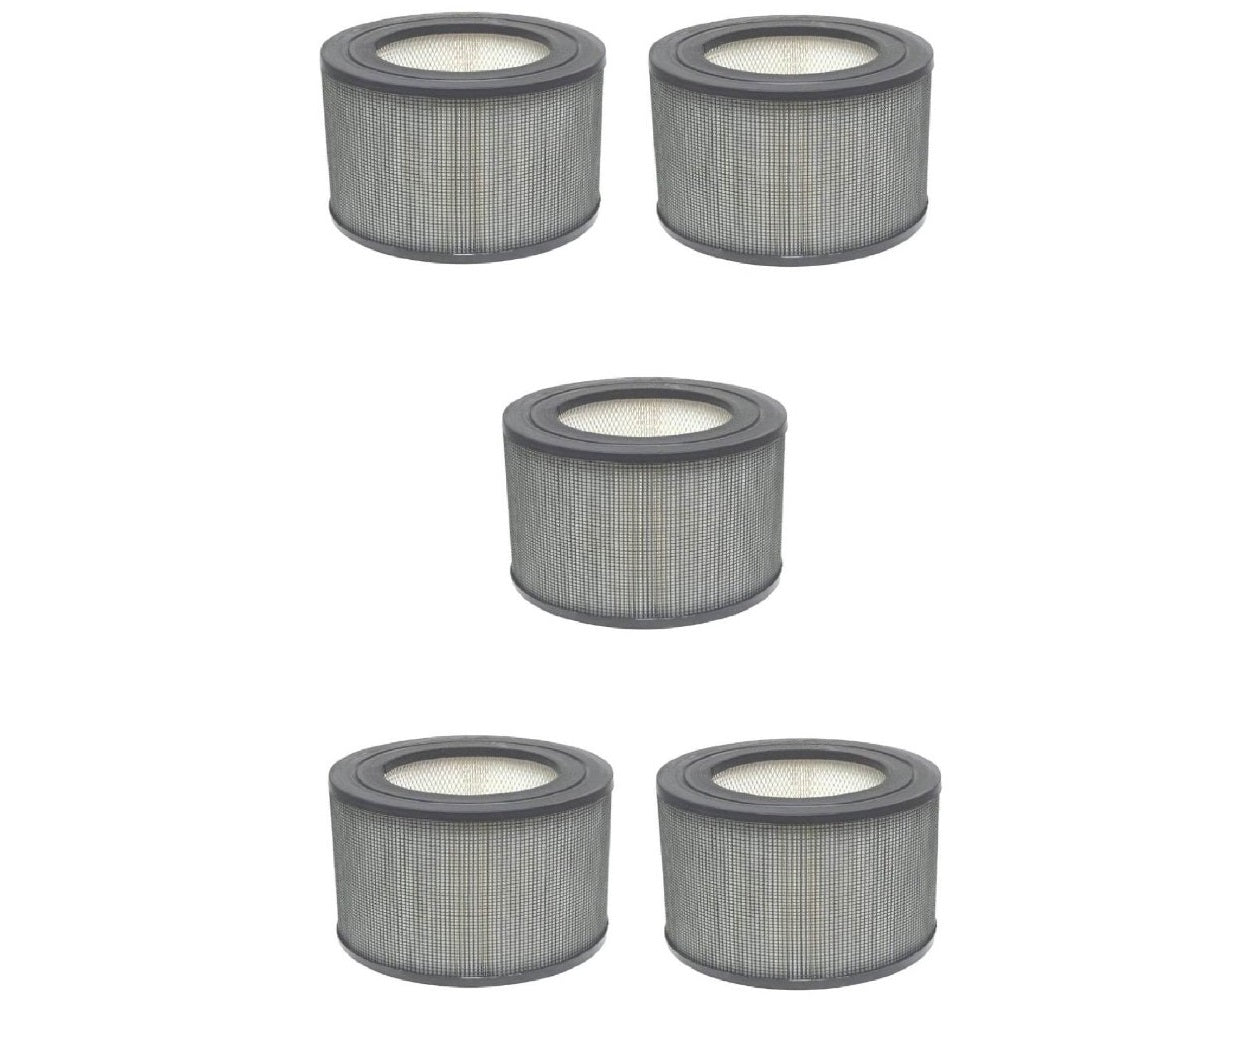 LifeSupplyUSA 5 Pack Replacement HEPA Filters fit Honeywell 24000 / 24500 Air Cleaner